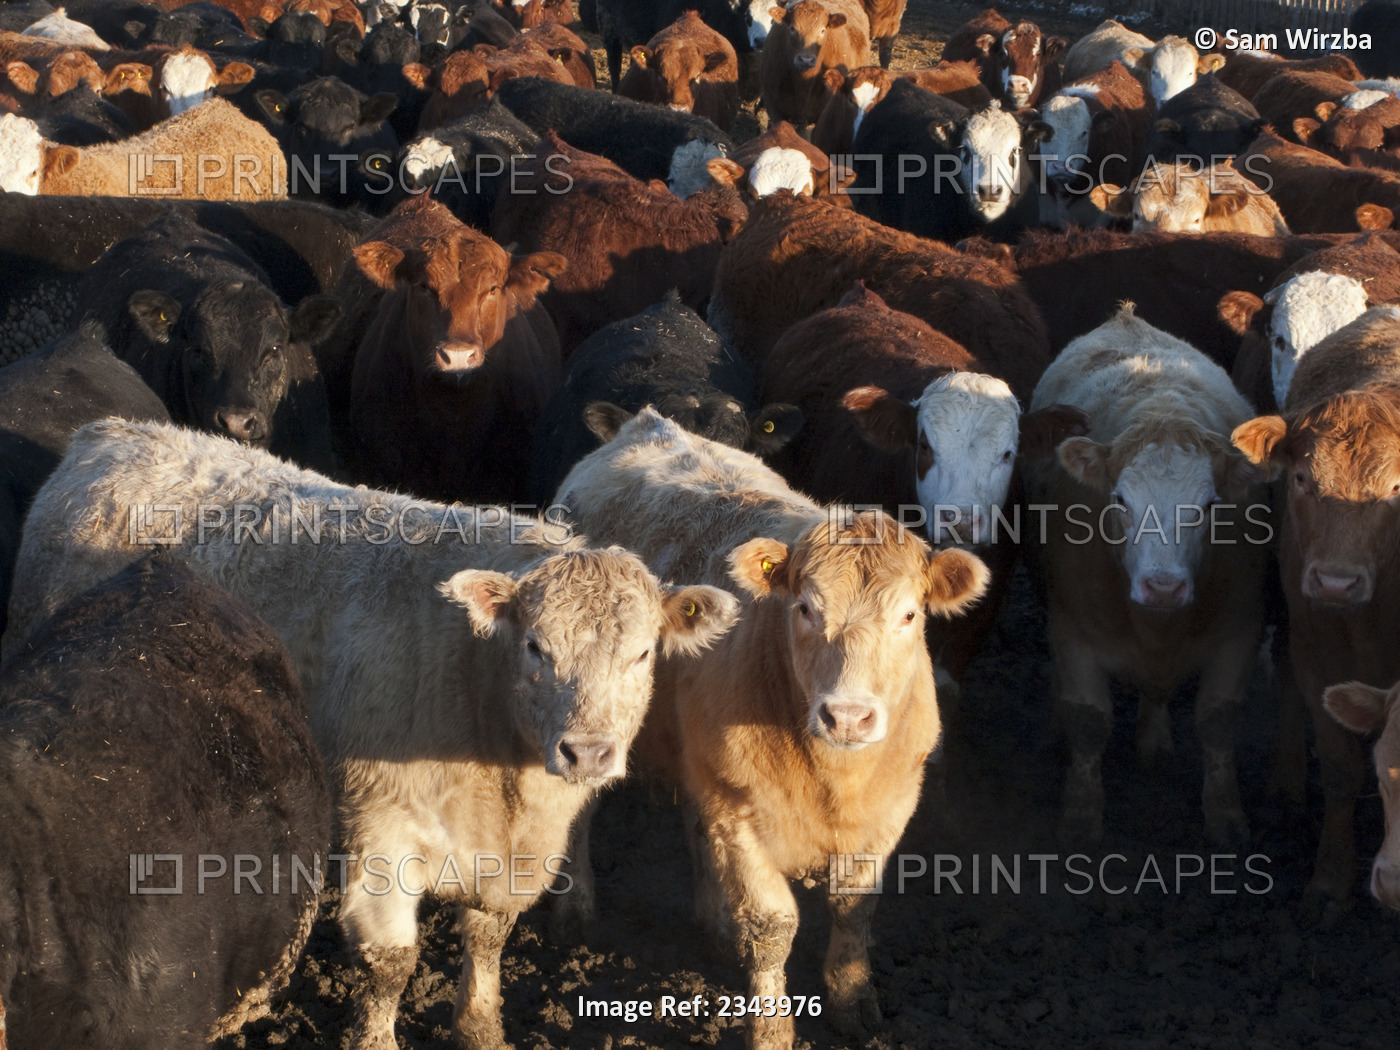 Livestock - Crossbred and mixed breeds of beef cattle in a feedlot pen in late ...